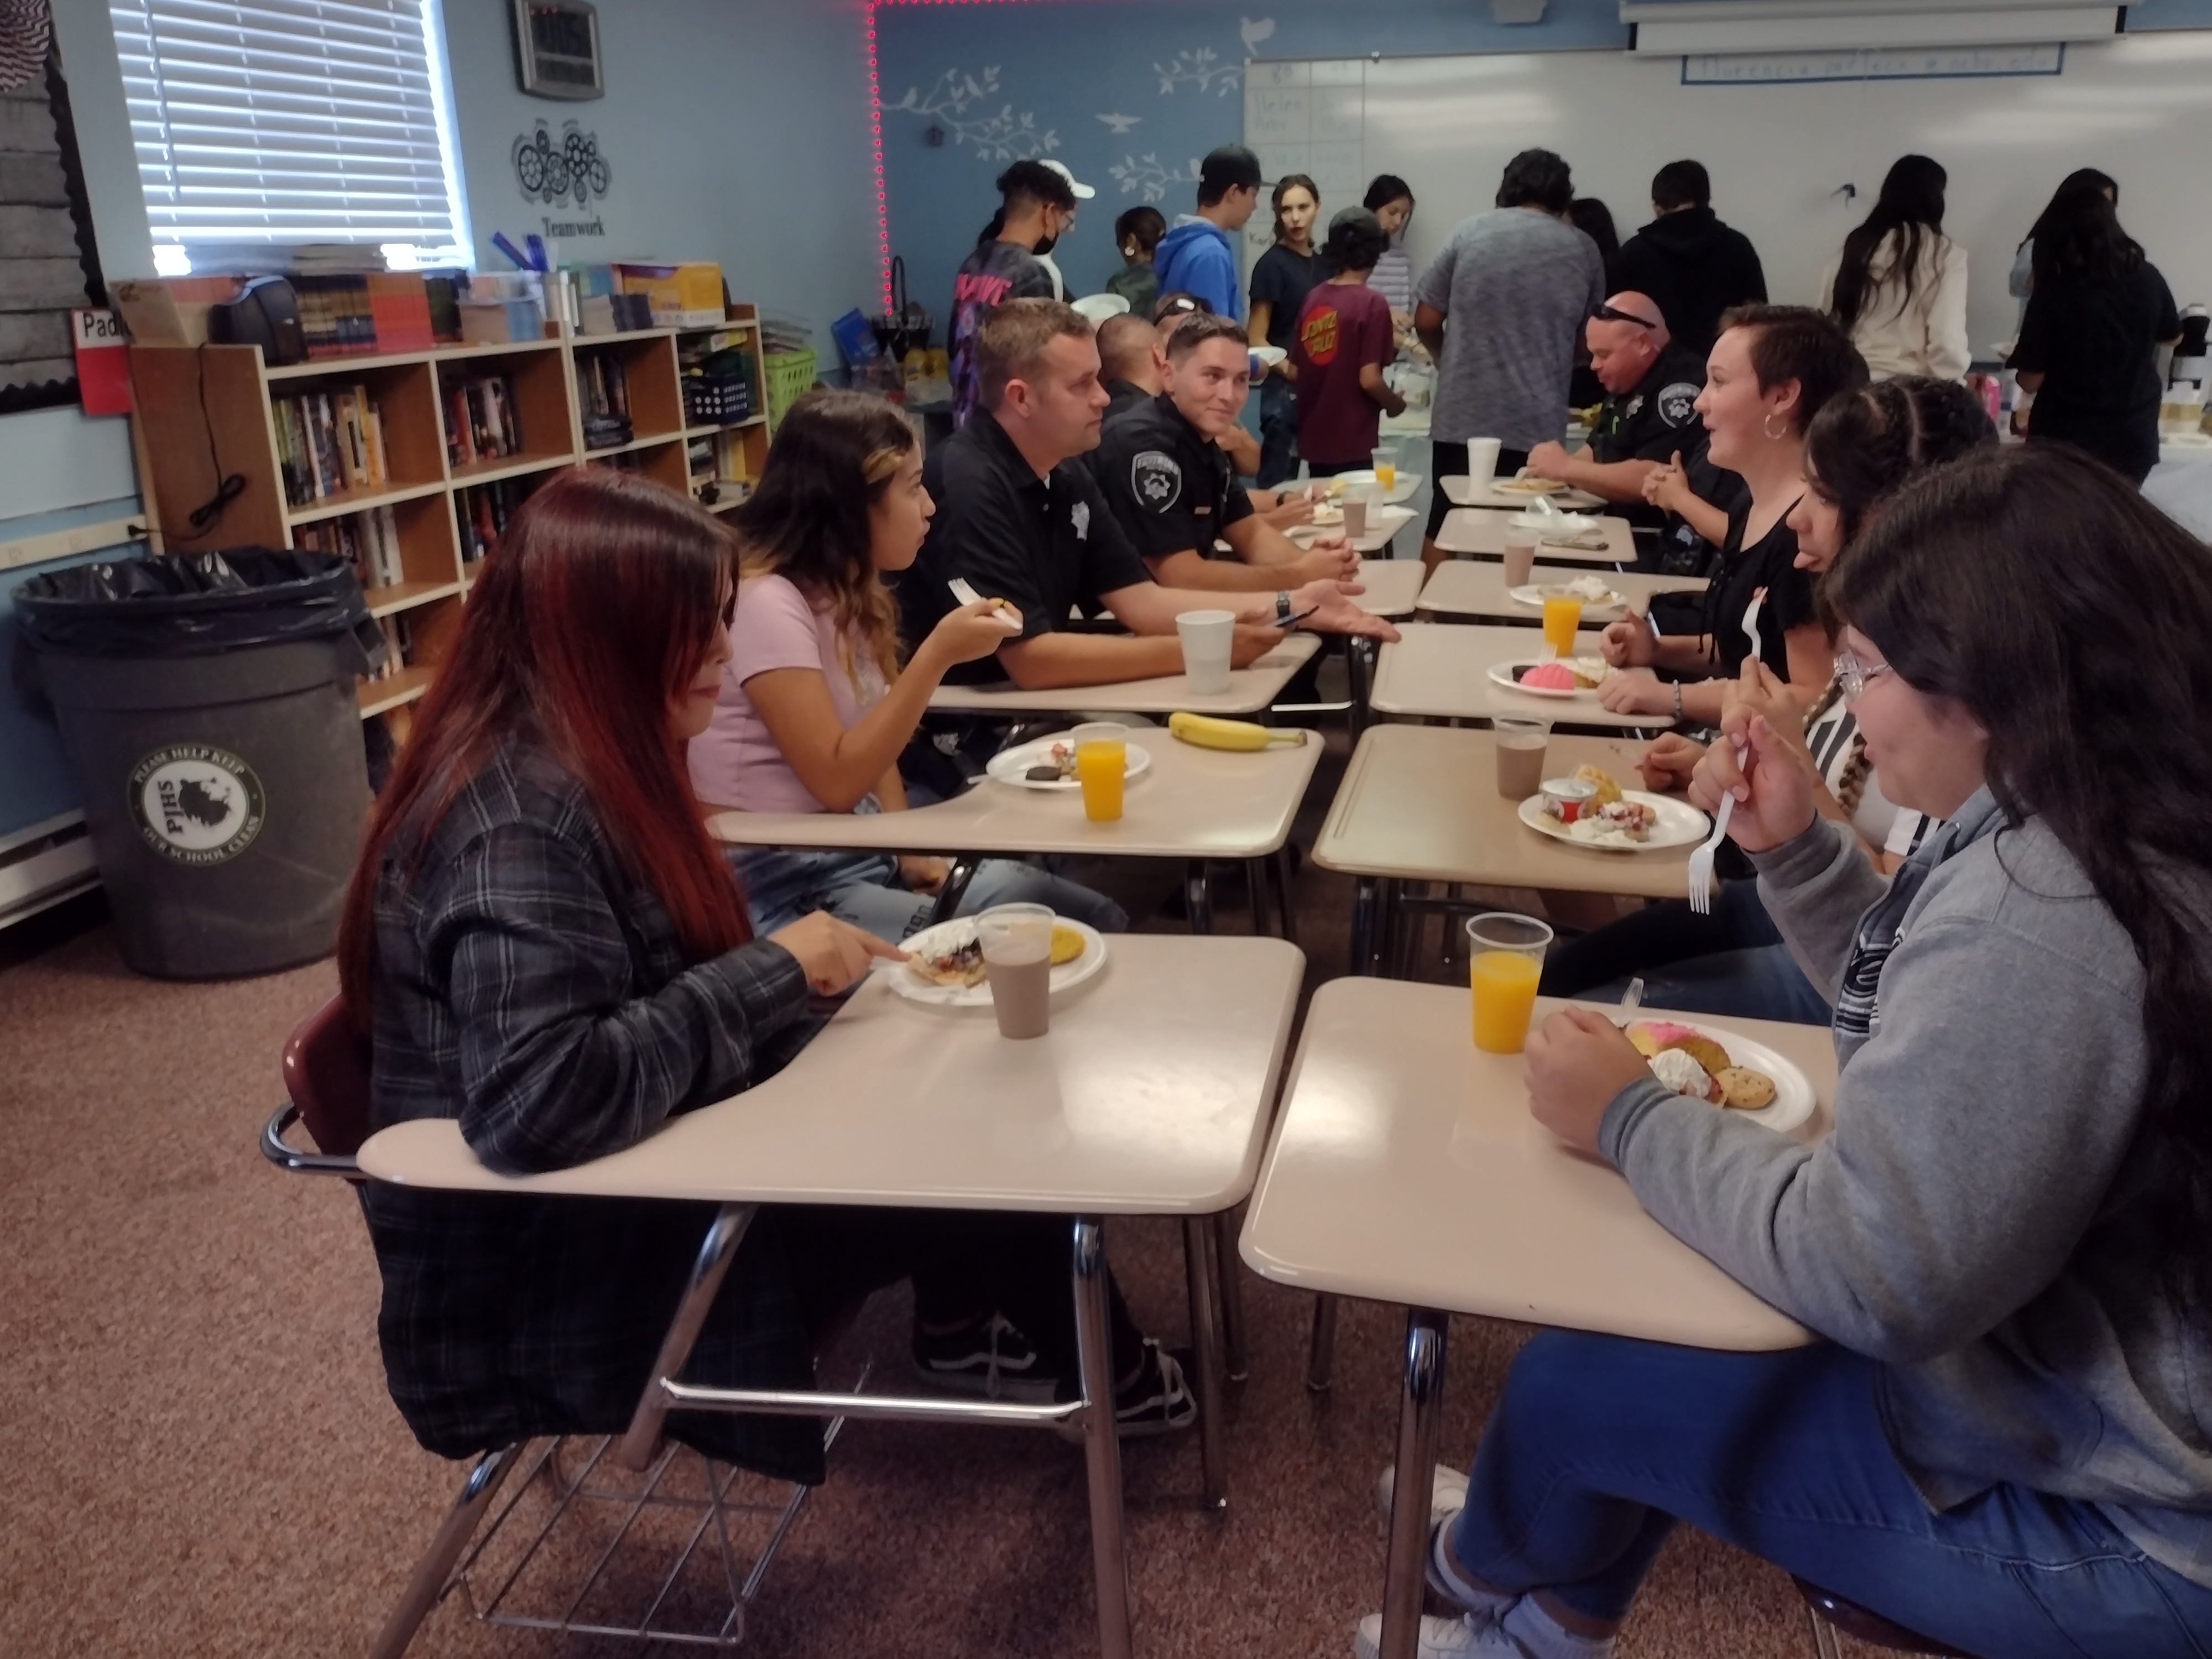 Payson Police Officers eating breakfast with students